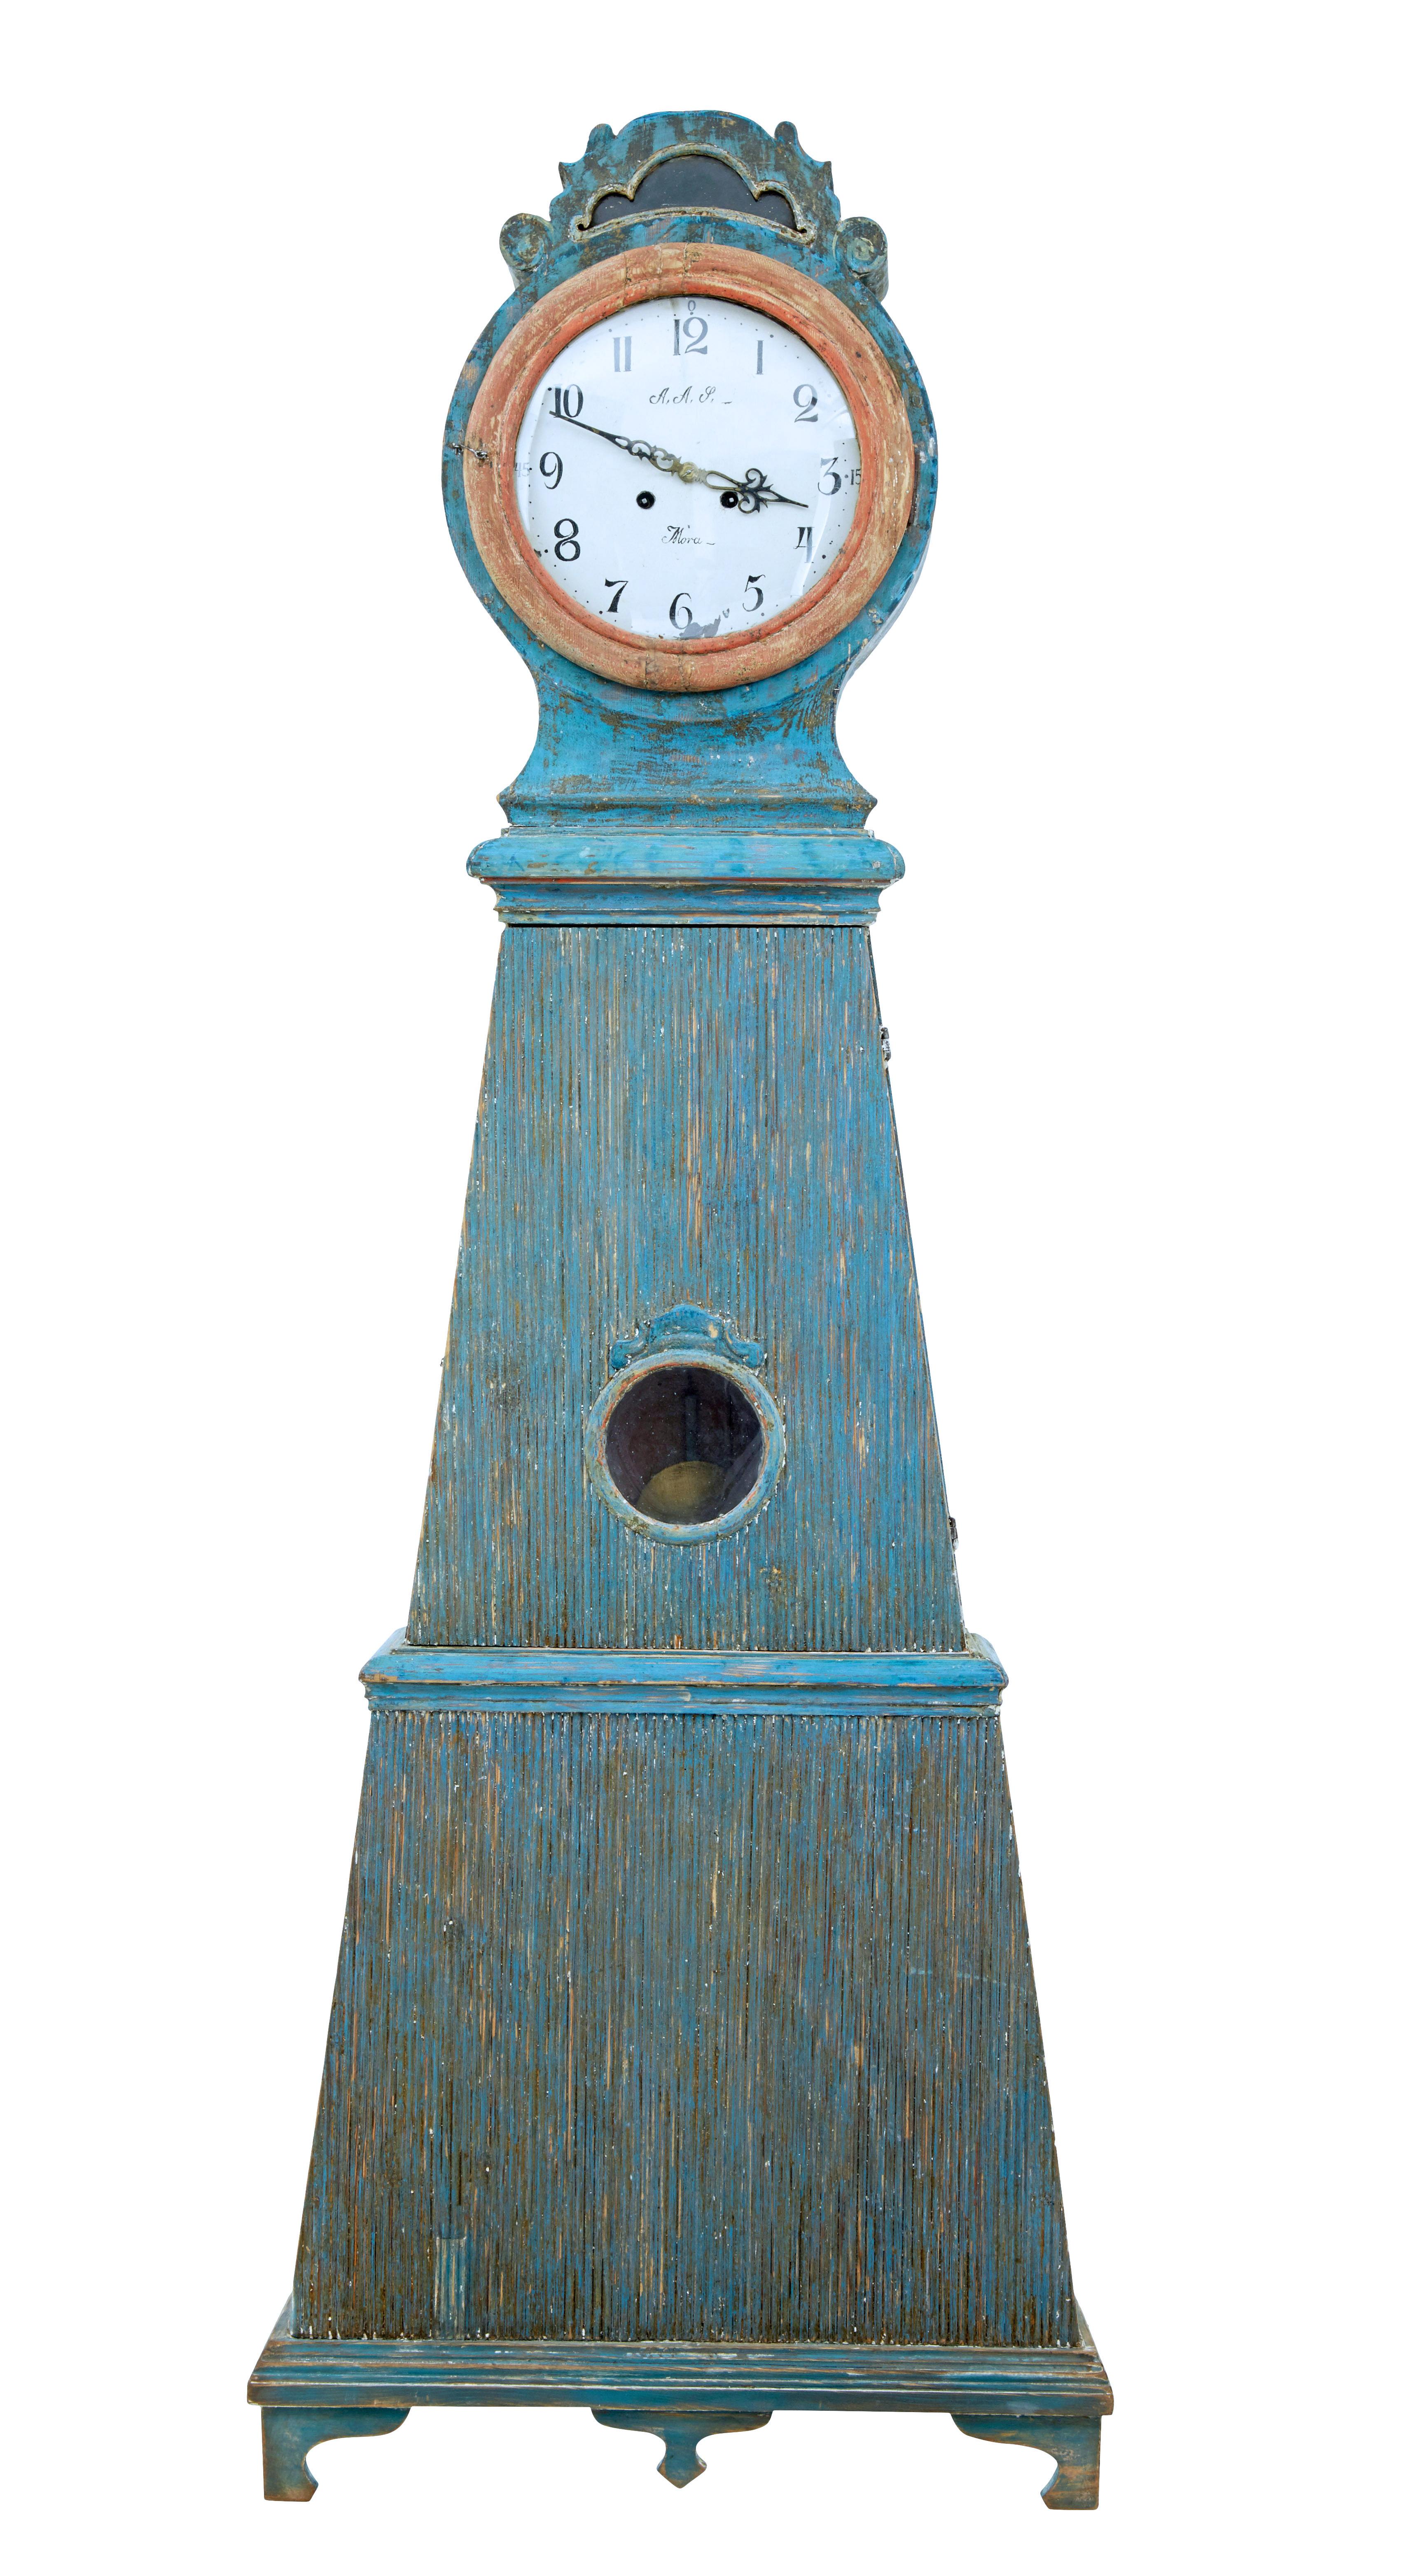 19th century decorative Swedish mora long case clock, circa 1850.

Stunning long case clock circa. Presented to you with original scraped back paint.

Clock dial with makers initials from the mora region. Pyramid shaped with fluted detailing.